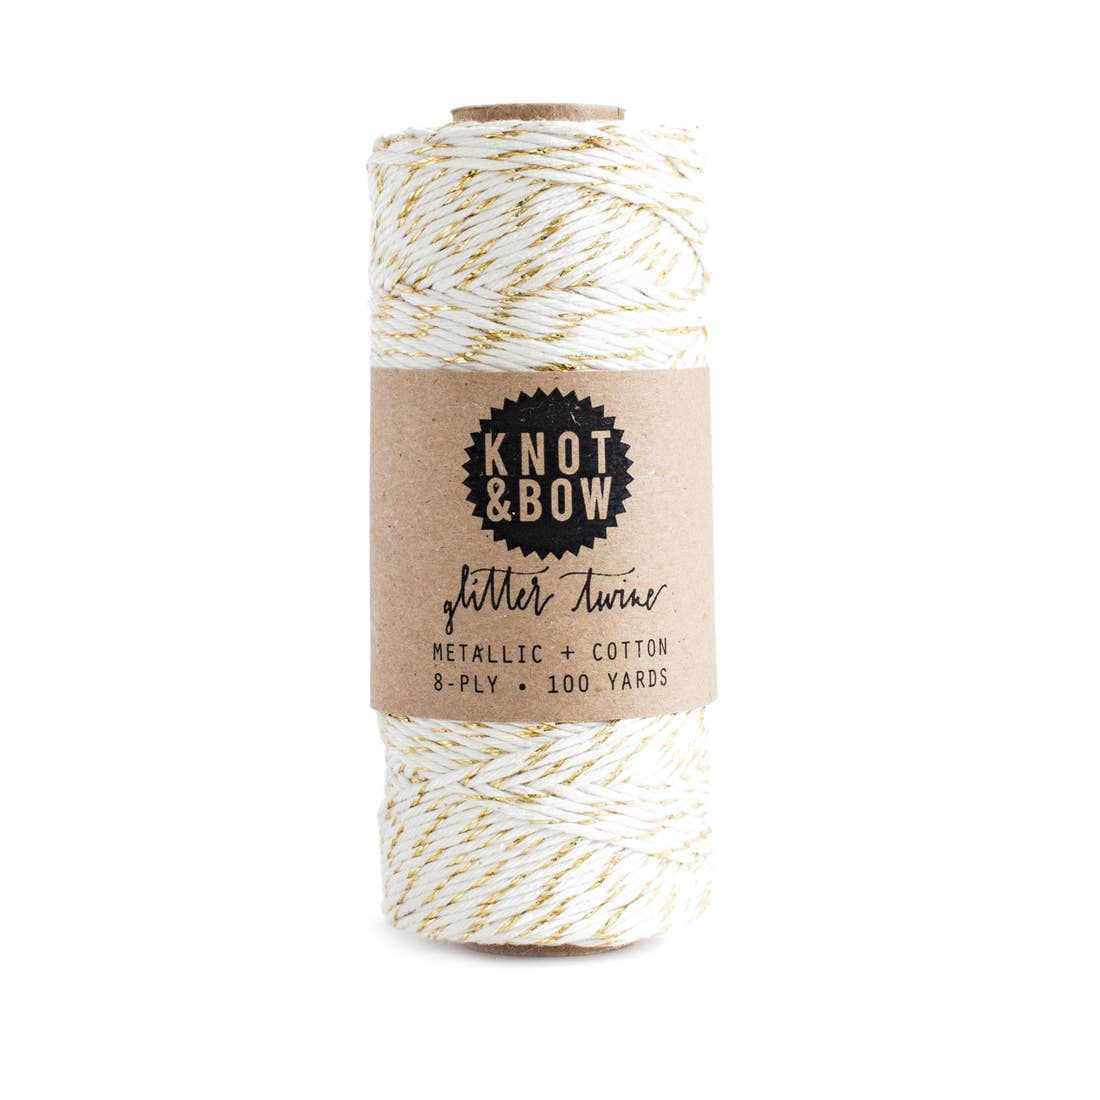 Glitter Twine by Knot & Bow - Natural and Gold by Knot & Bow - K. A. Artist Shop